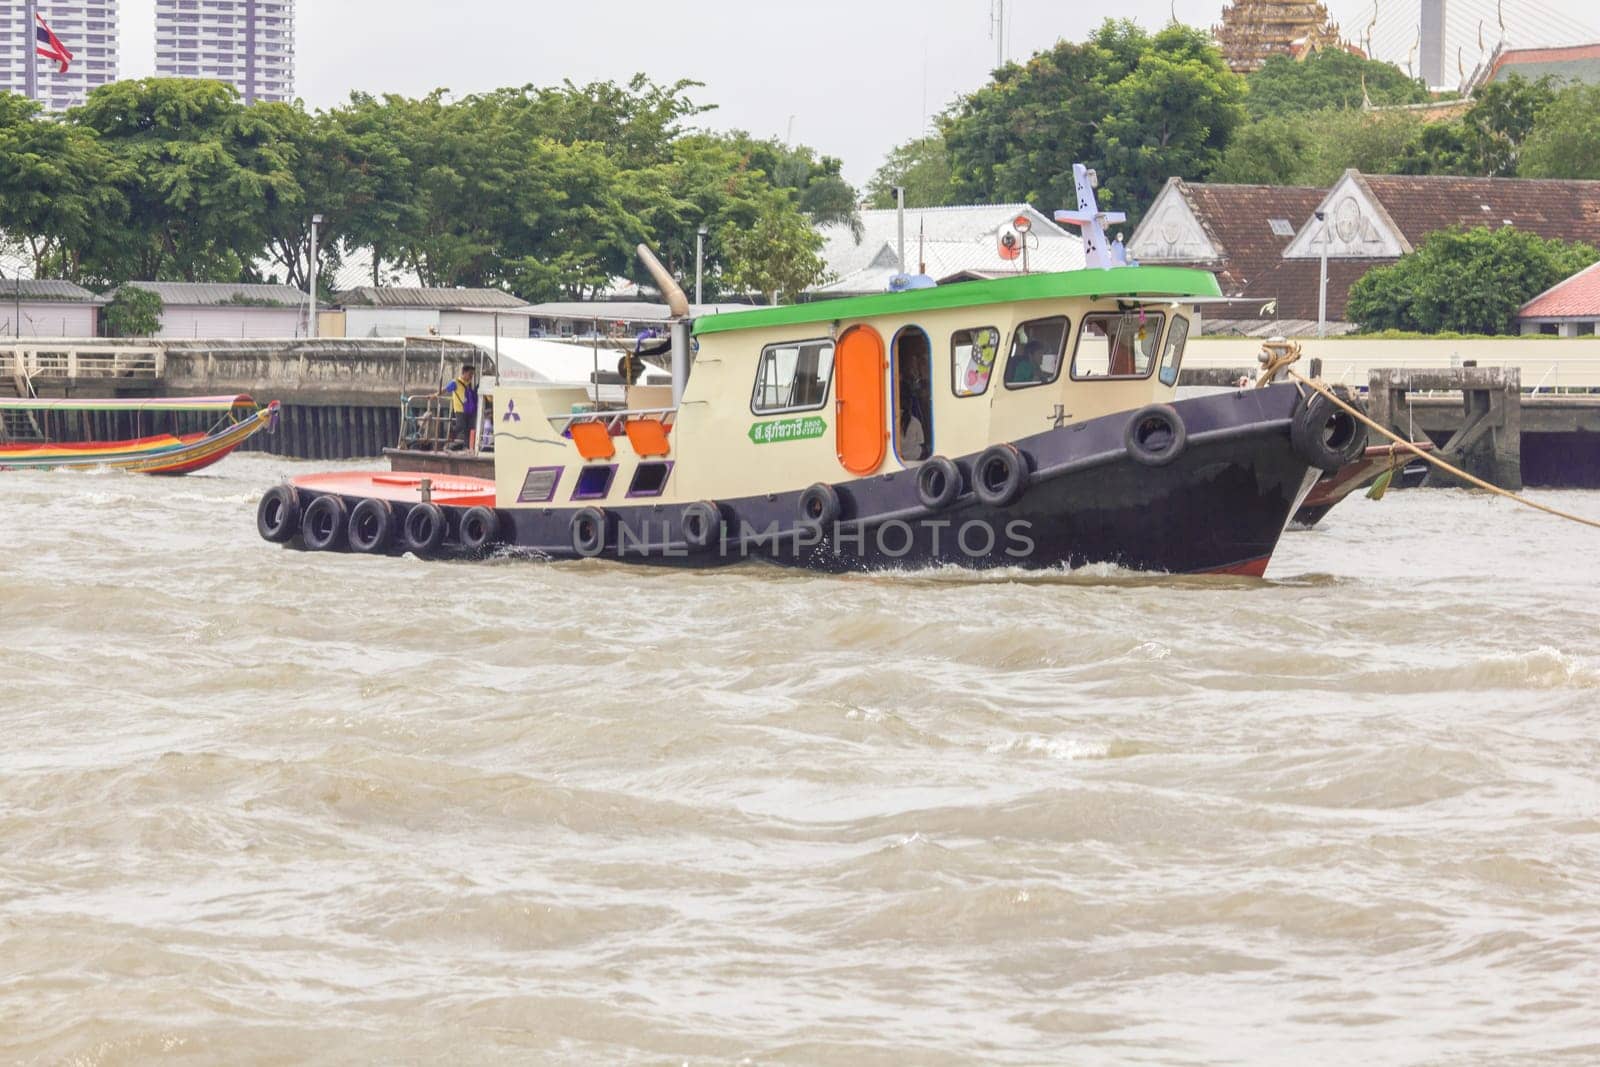 The boat in the Chao Phraya River